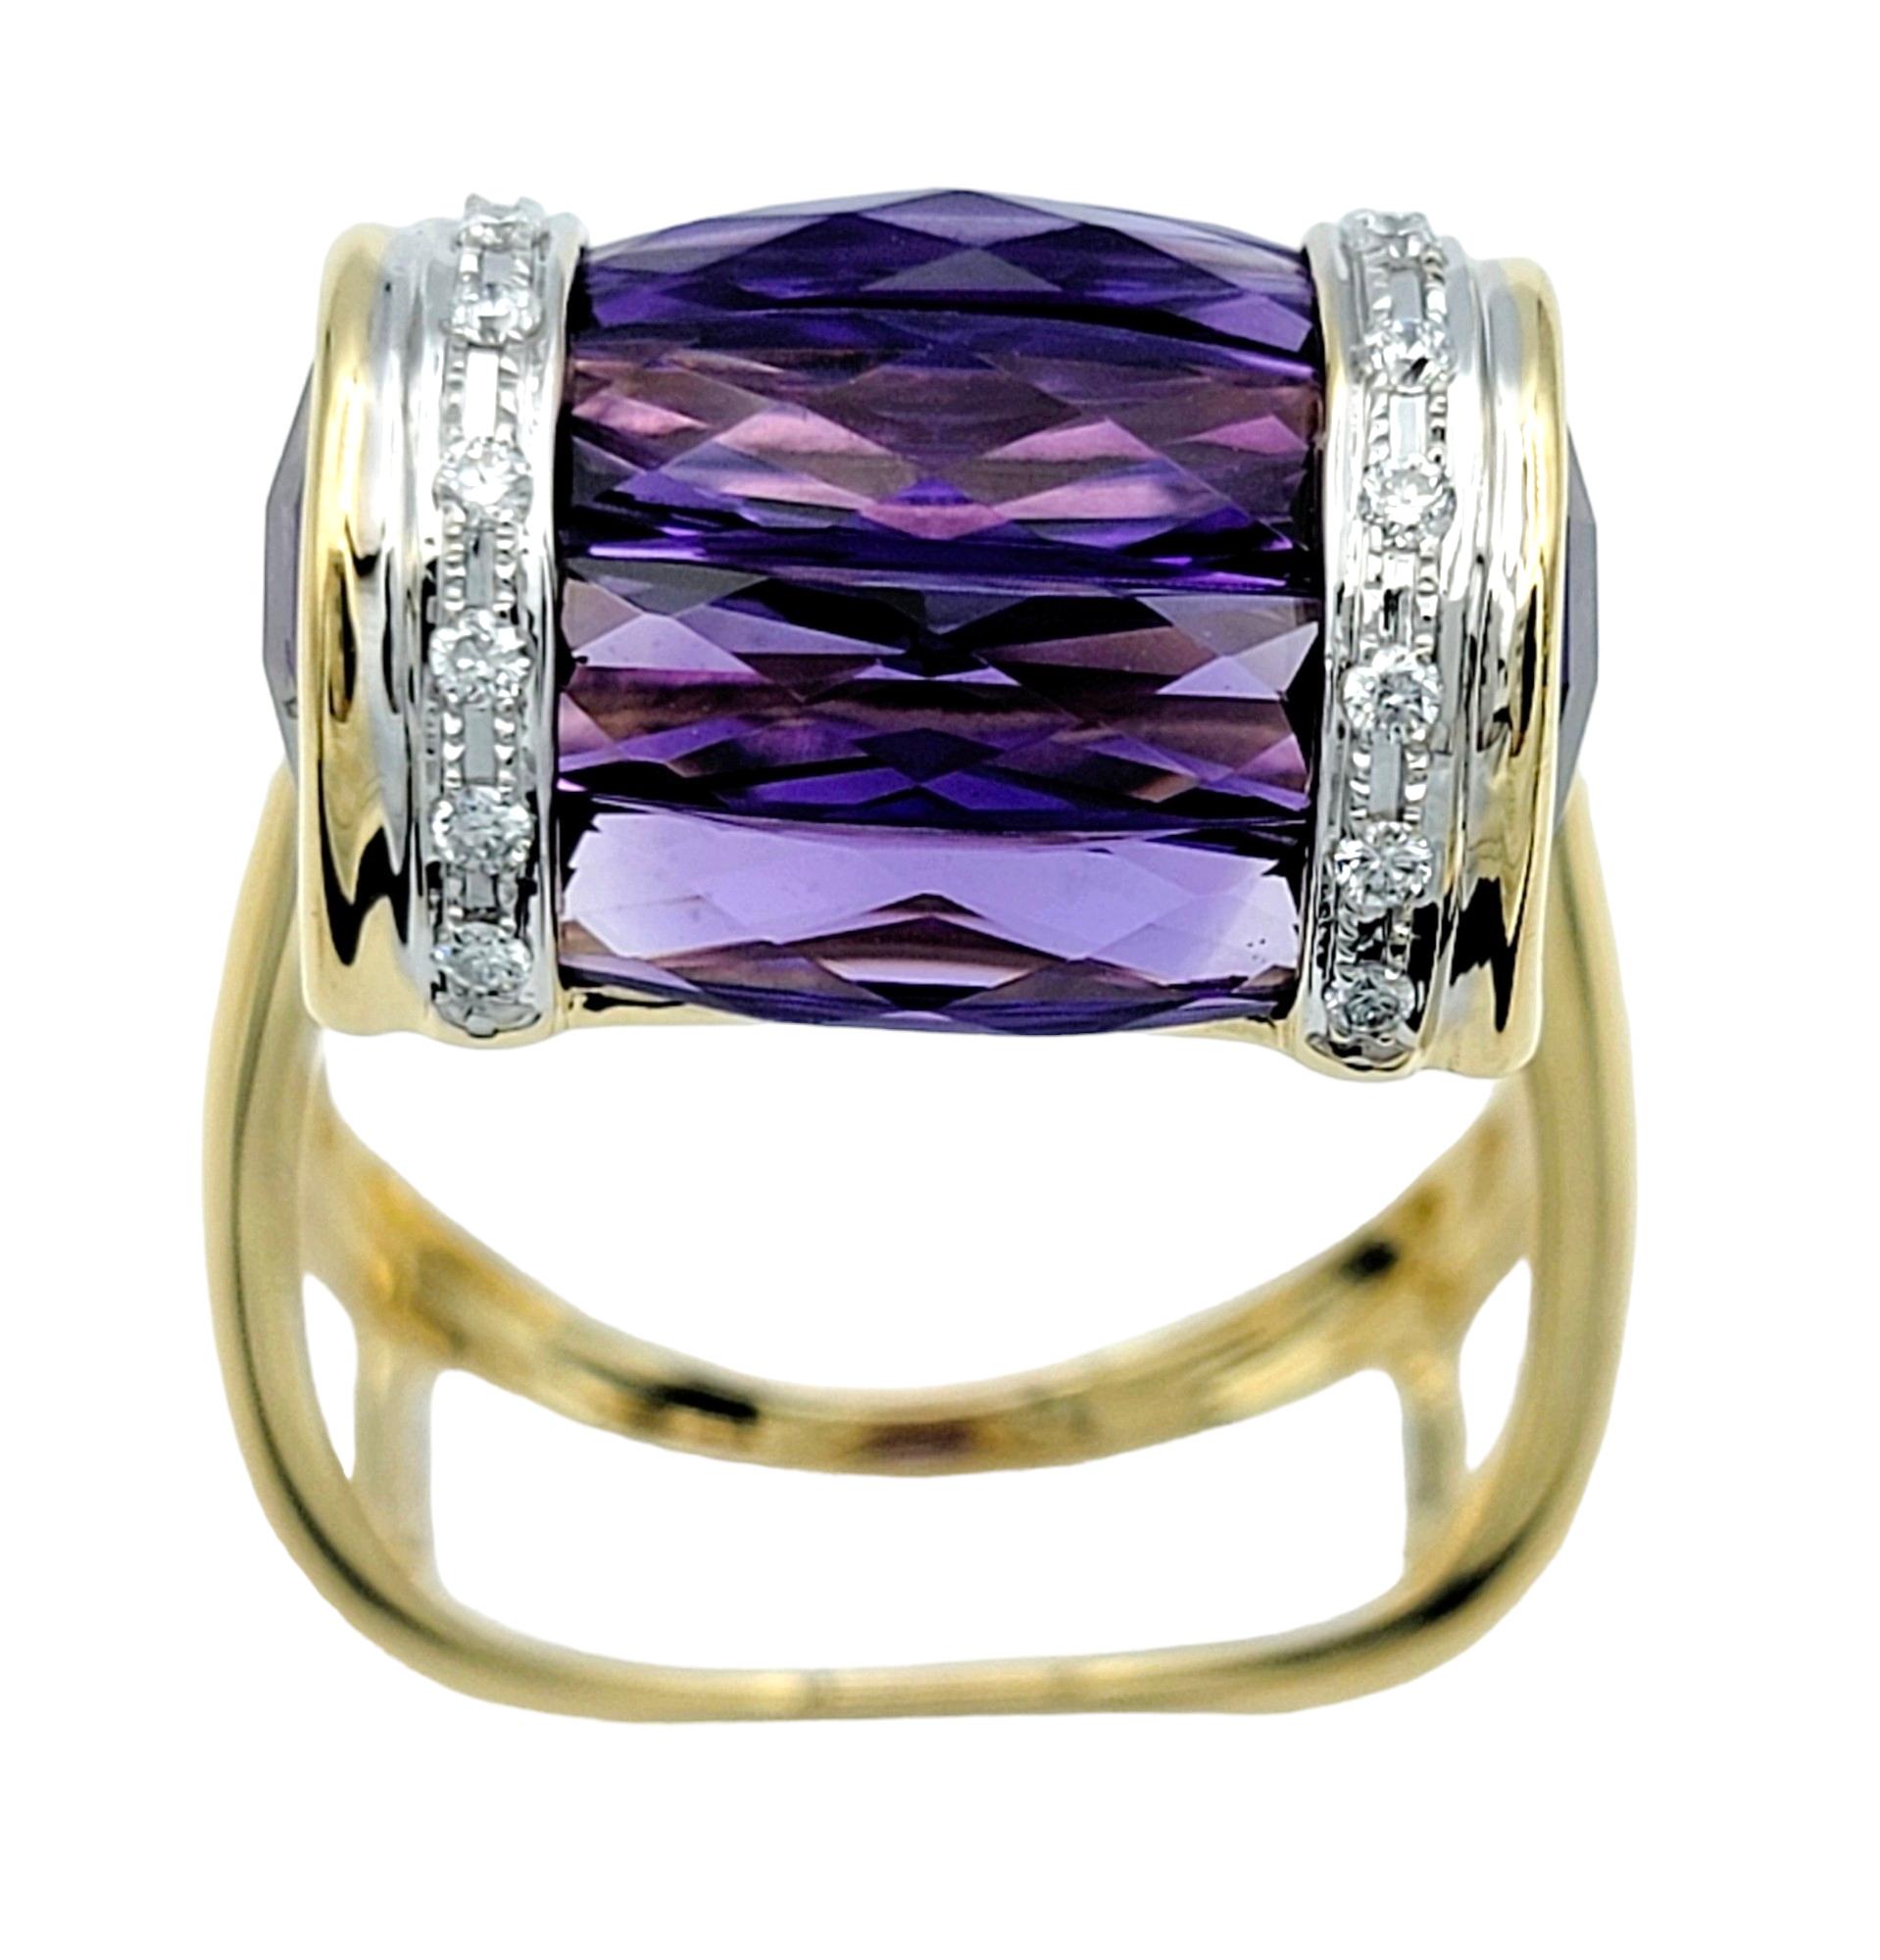 Ring Size: 7.75

This stunning Bellarri cocktail ring is a dazzling masterpiece crafted in 18 karat yellow and white gold. At its center, six gorgeous purple cushion cut amethyst stones are stacked together, creating a captivating focal point.